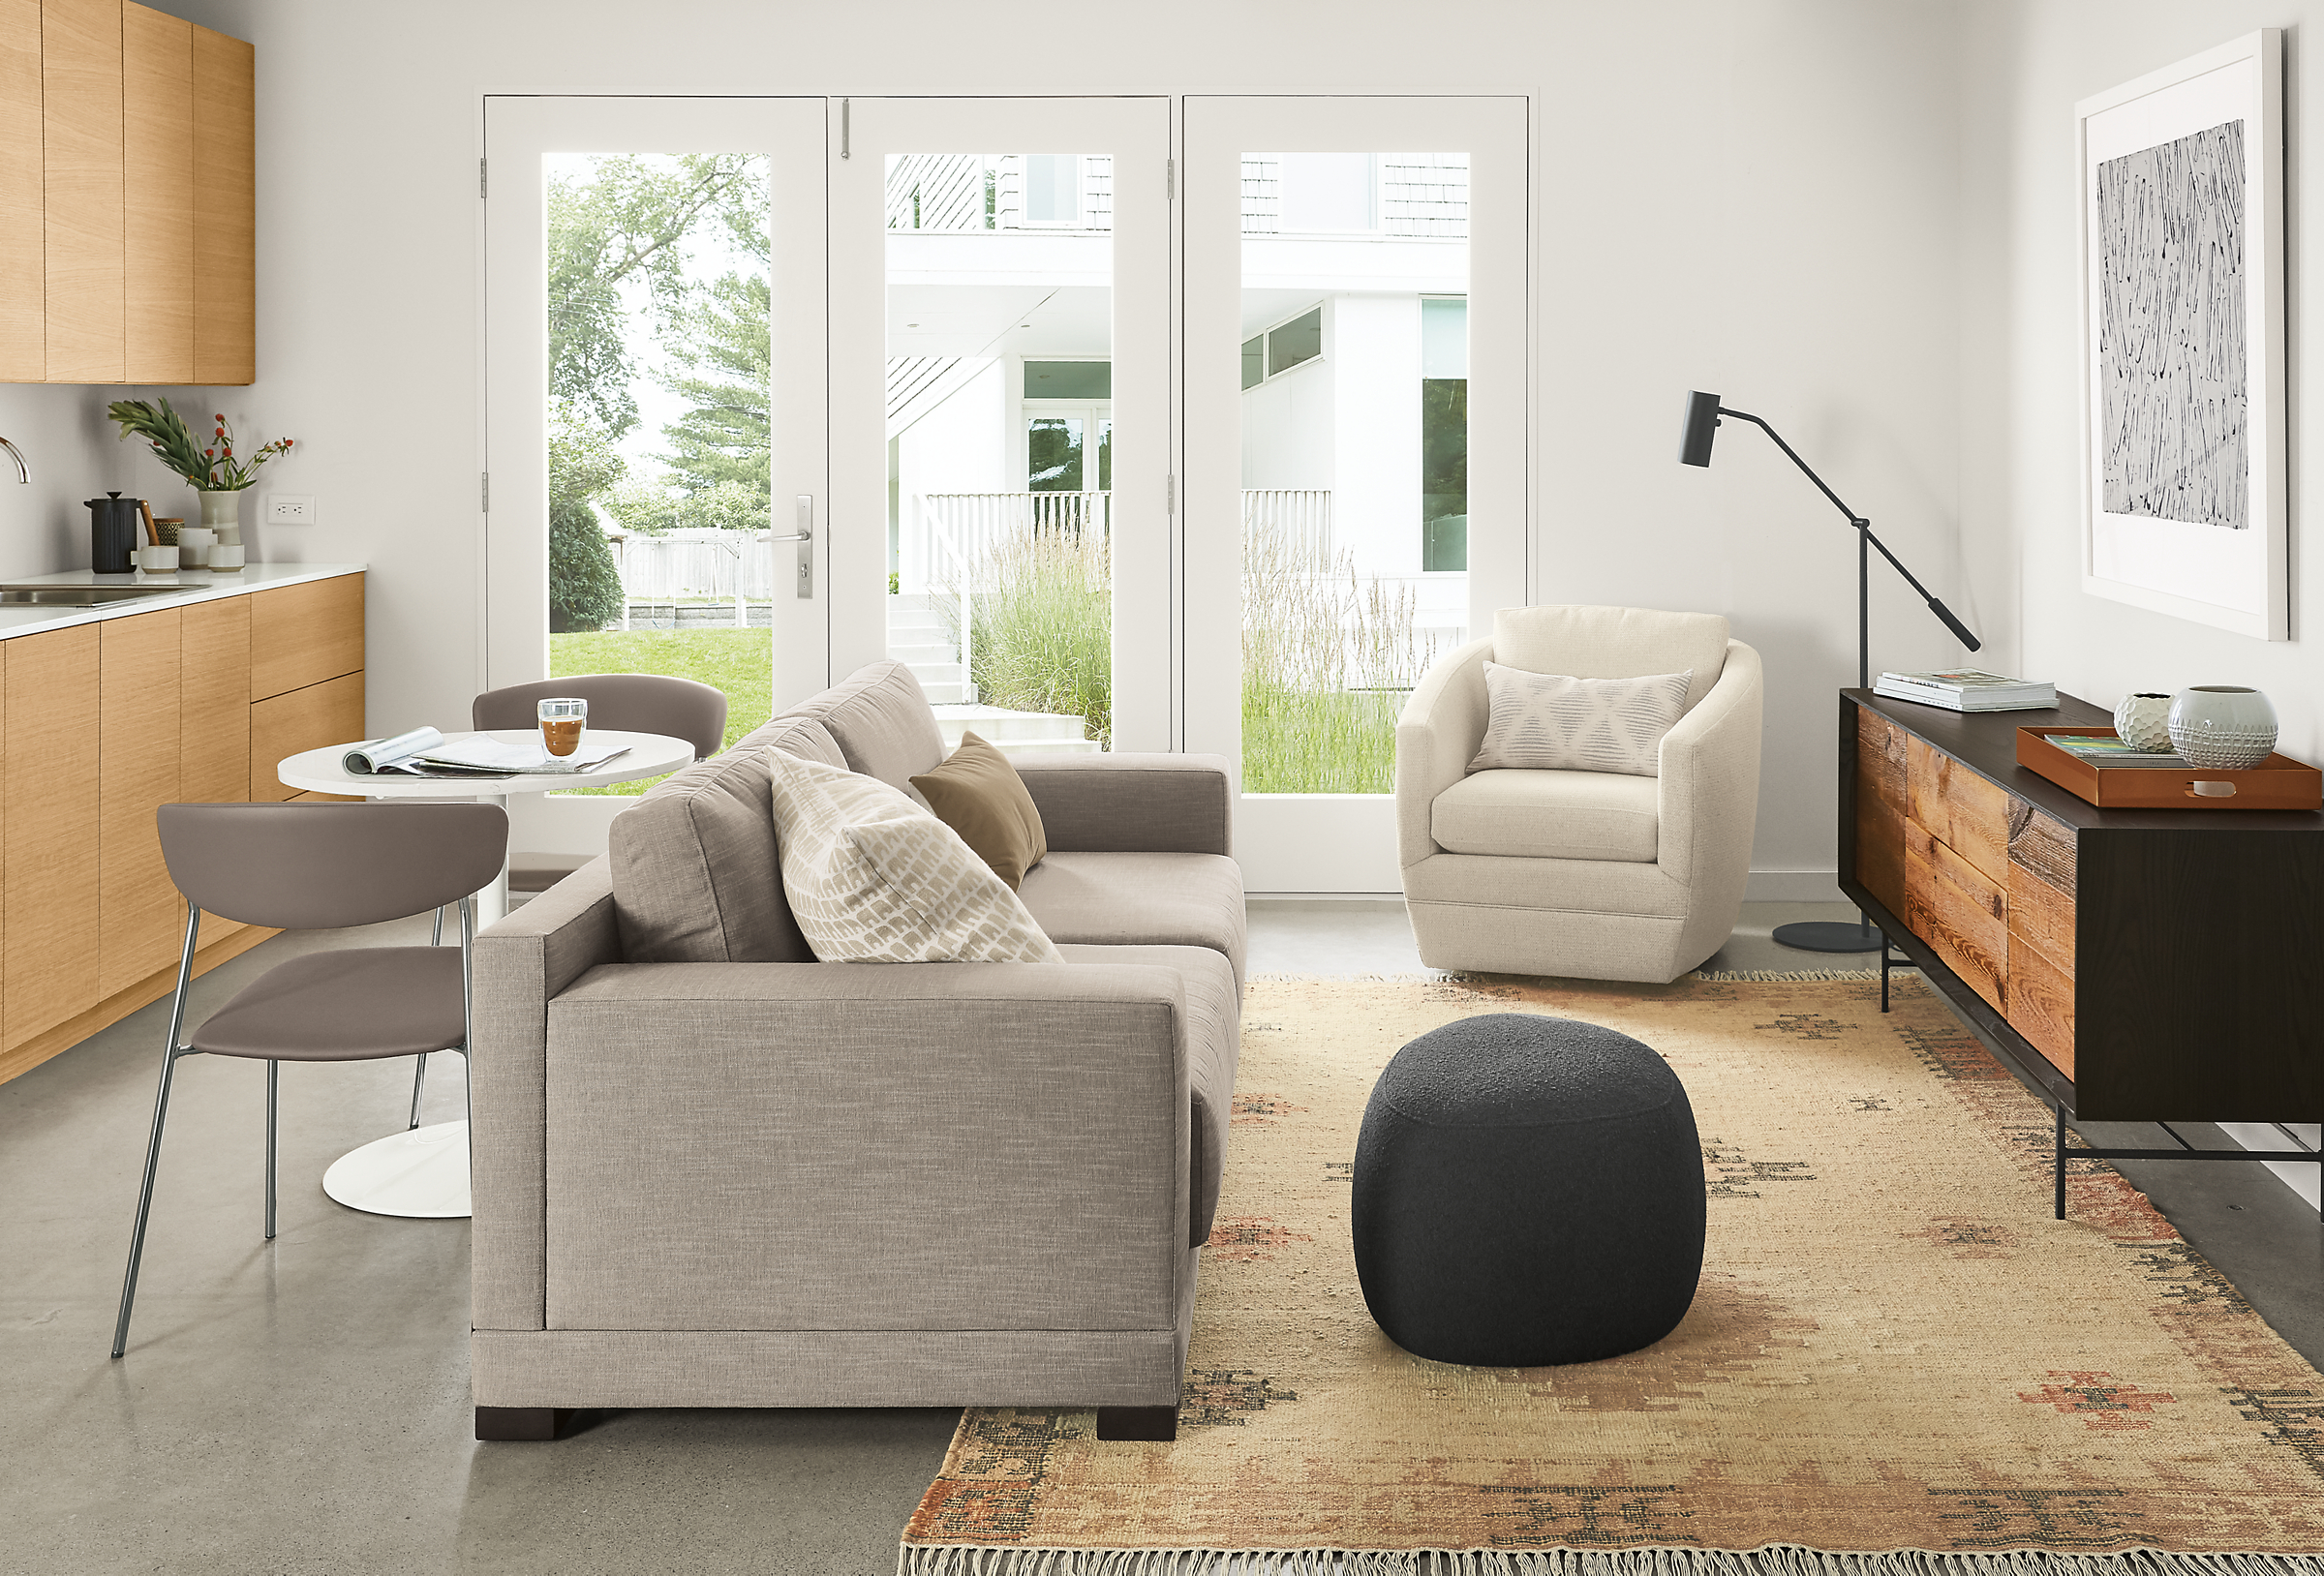 Side view of Mira sofa in Destin Putty fabric in small living/dining space.